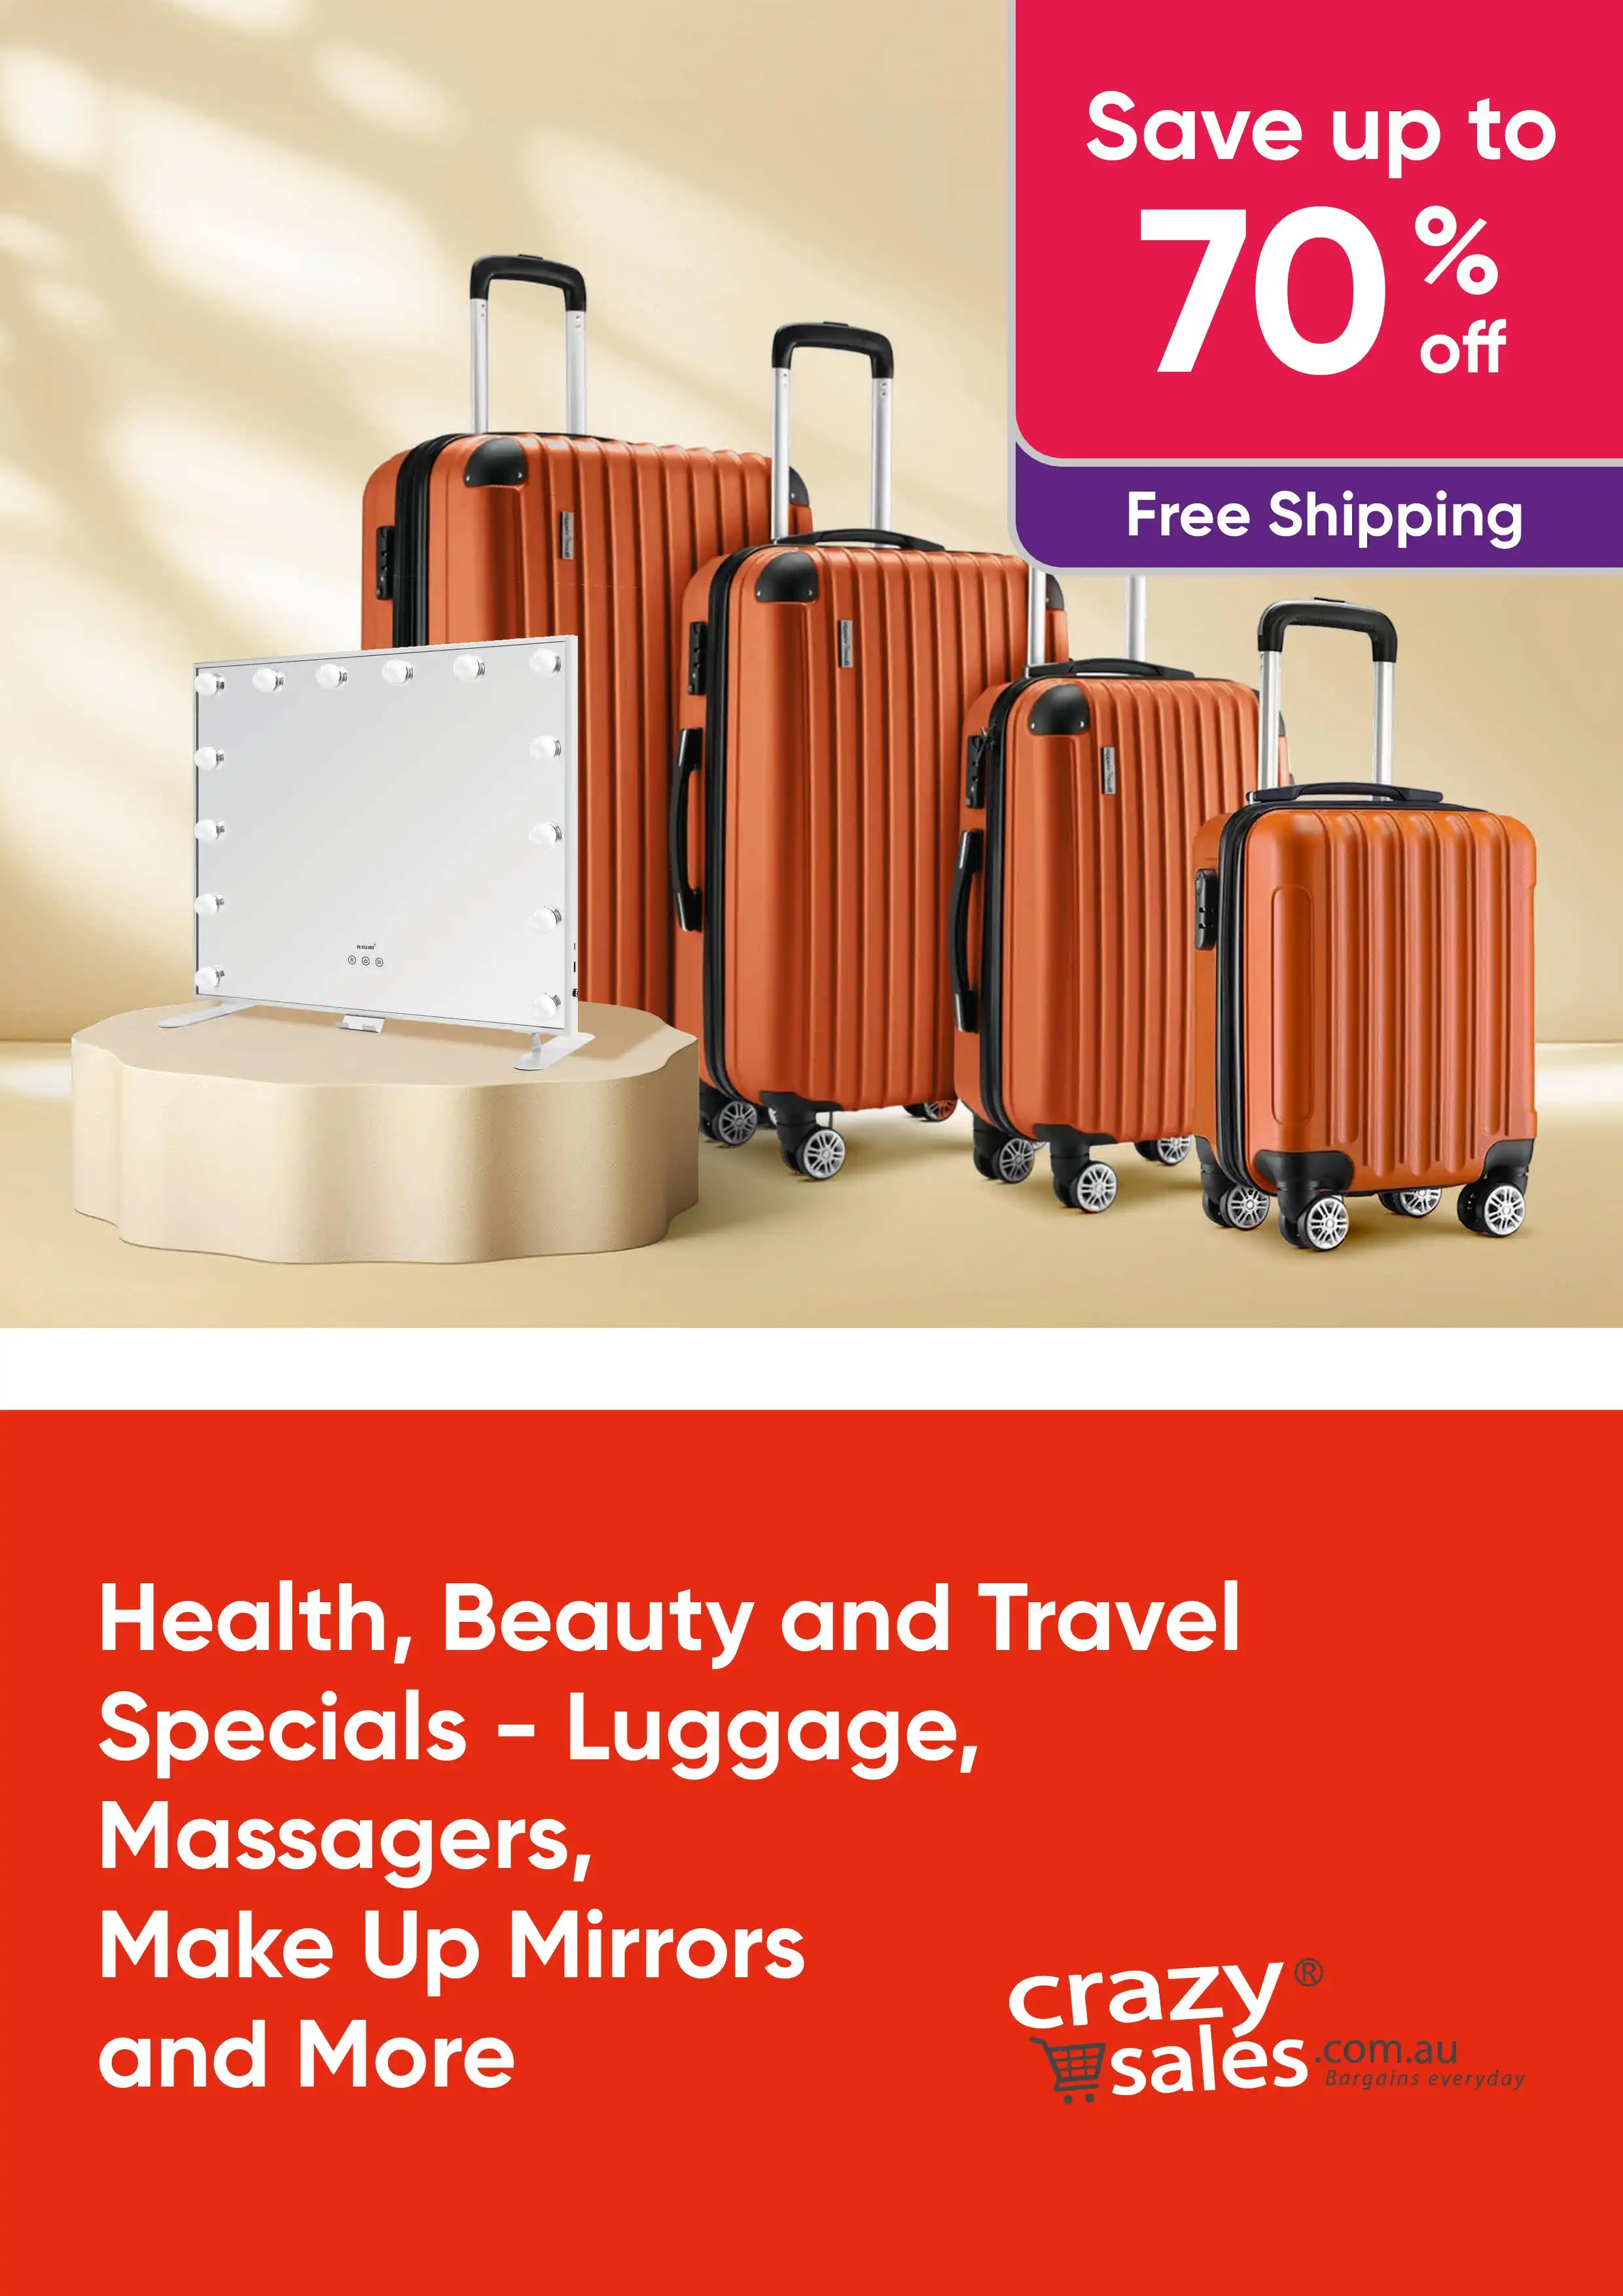 Health, Beauty and Travel Specials - Save Up To 70% Off Luggage, Massagers, Make Up Mirror and More